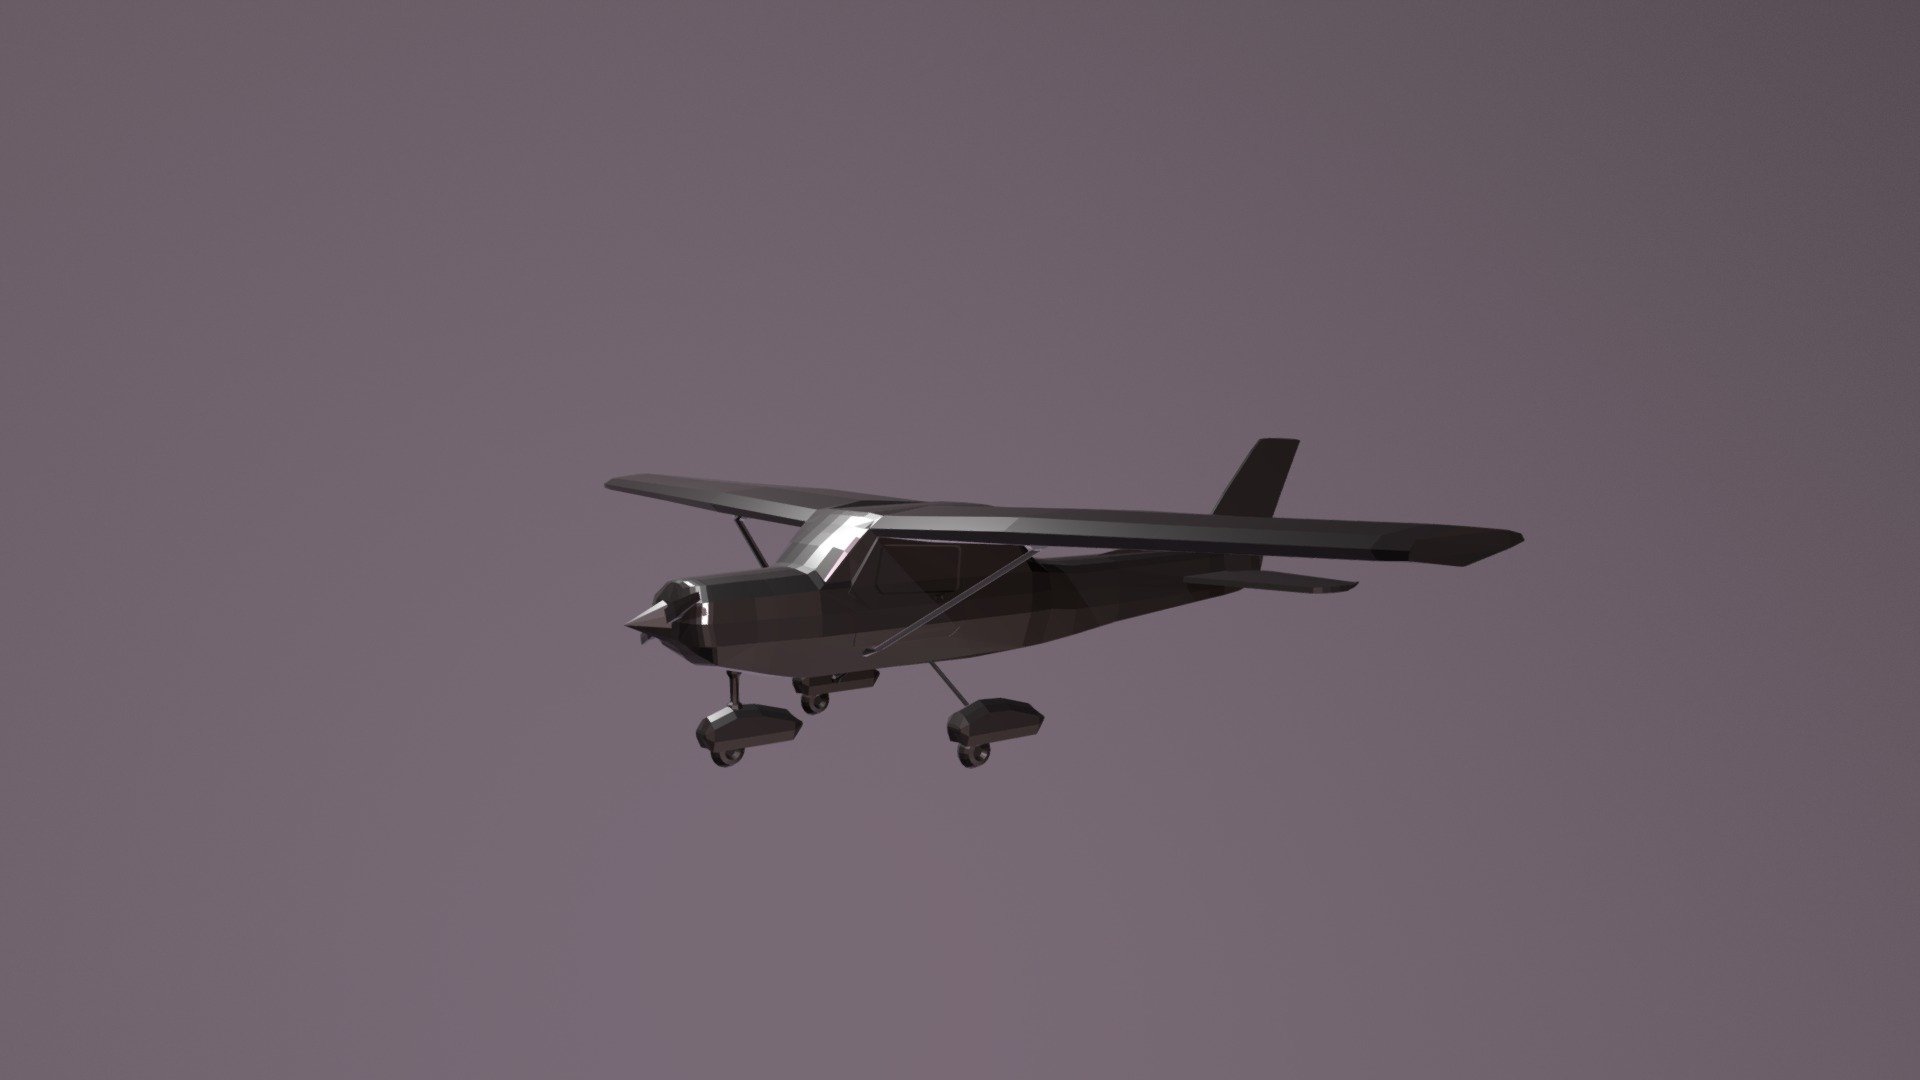 LowPoly Cessna 158 aircraft